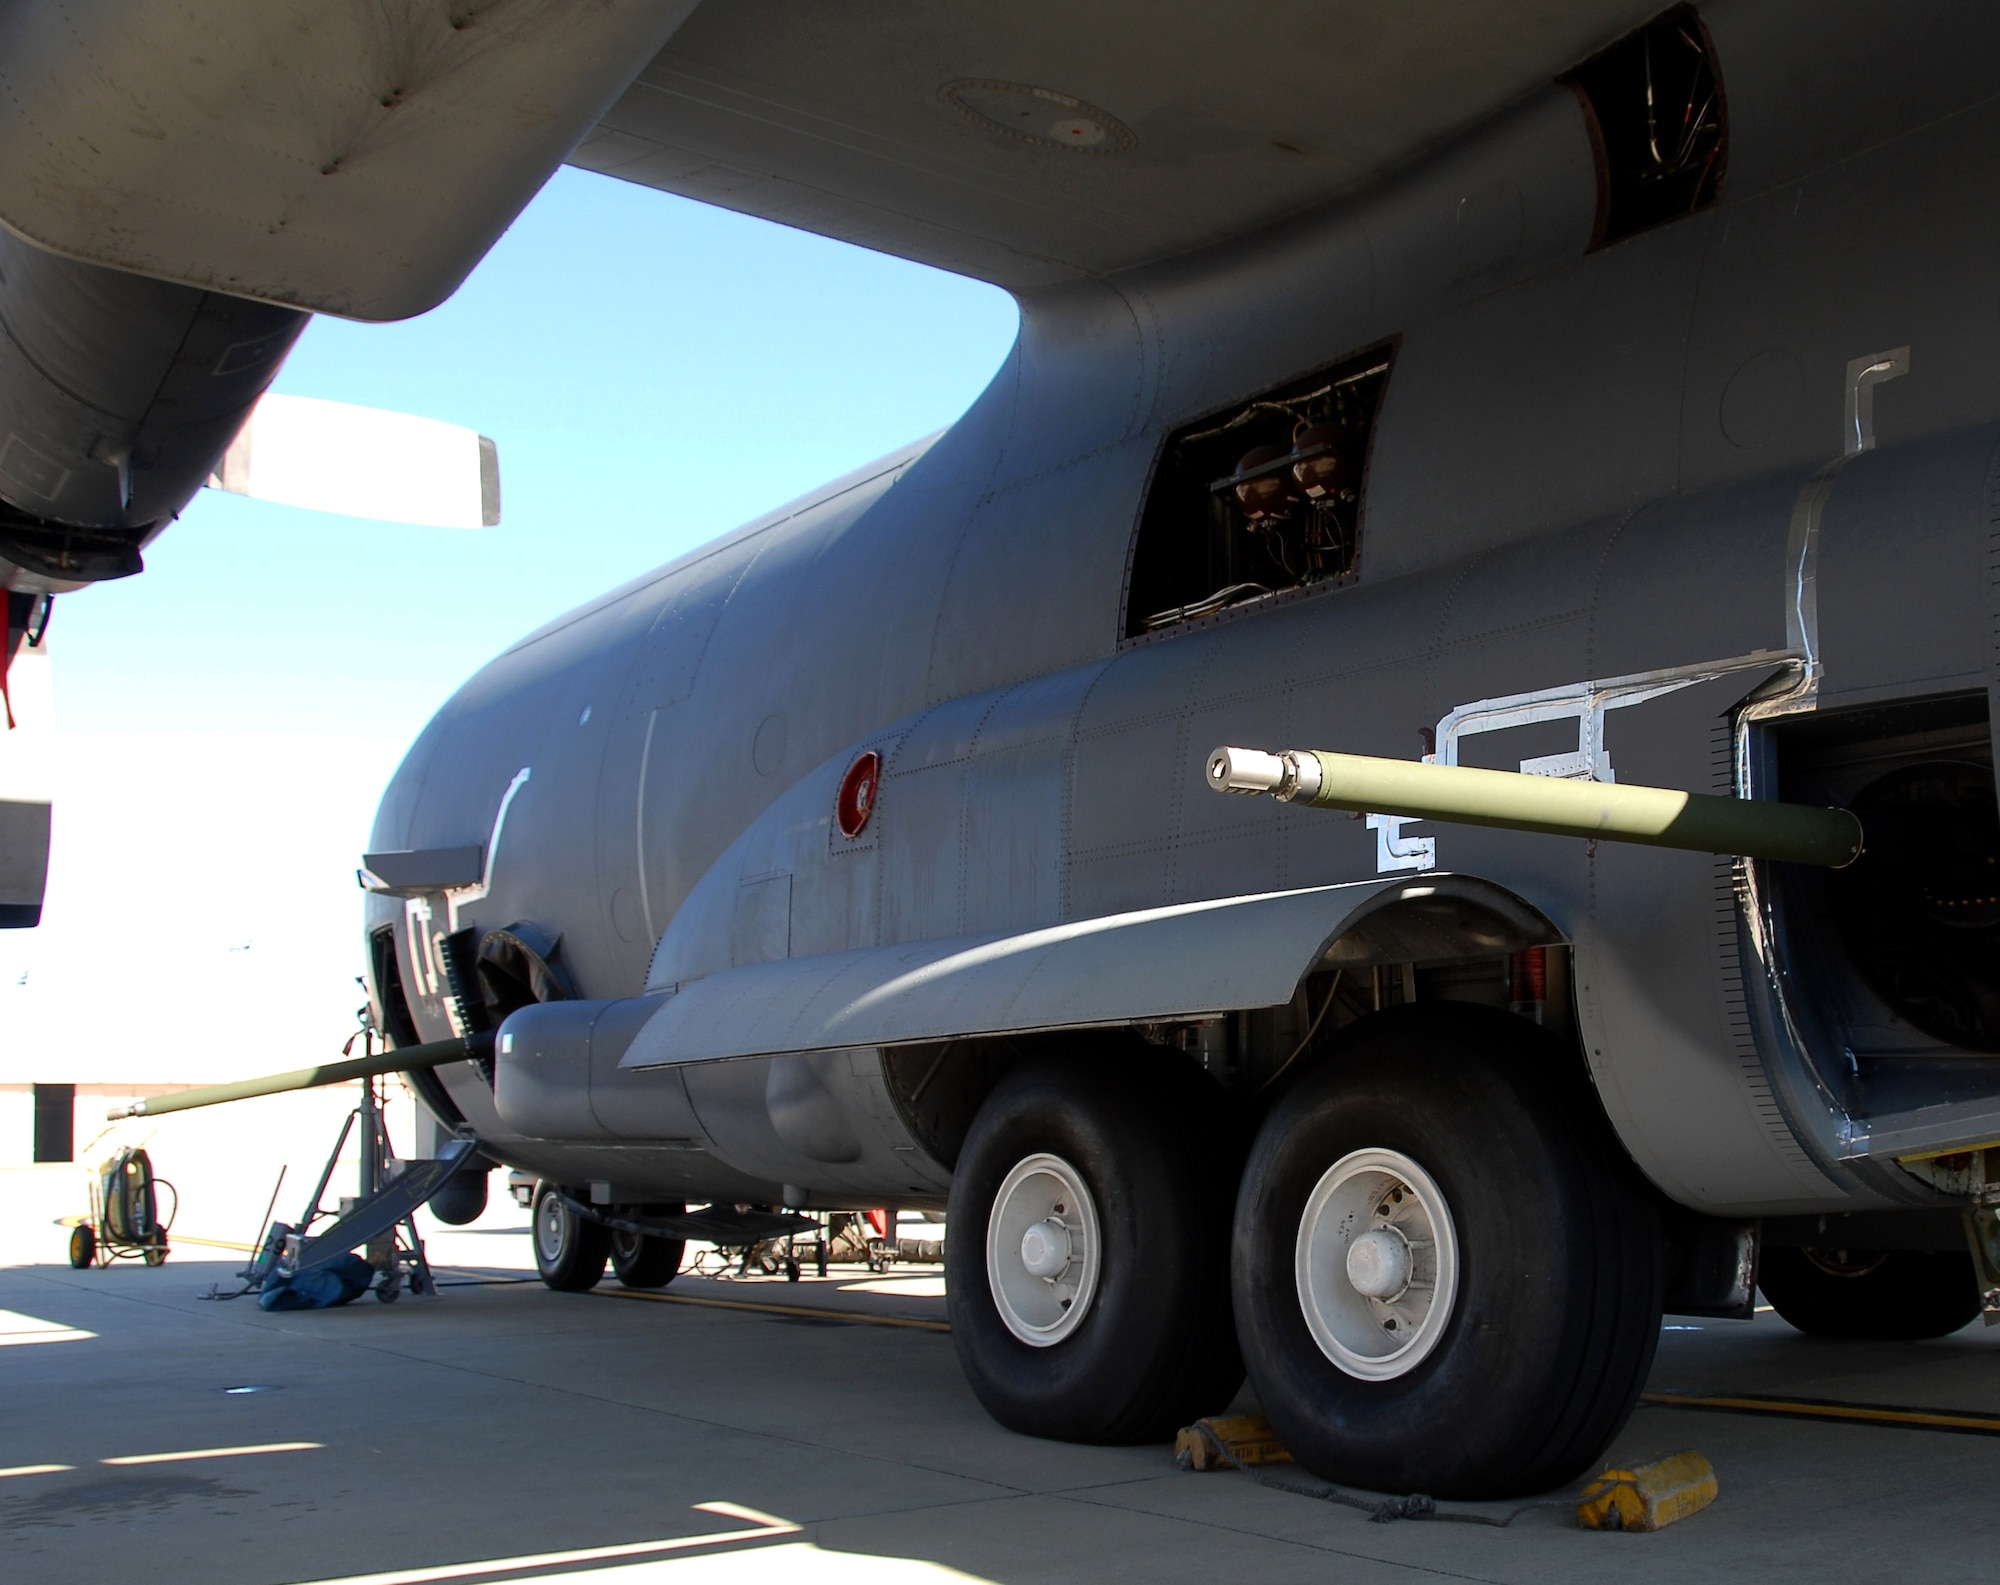 Bushmaster 30 mm cannons protrude from the gunports of an AC-130U Spooky gunship during tests Jan. 26 at Hurlburt Field, Fla. The 30 mm gun will eventually replace both the 40 mm cannon and 25 mm gun on U-model gunships. (U.S. Air Force photo/Chief Master Sgt. Gary Emery) 